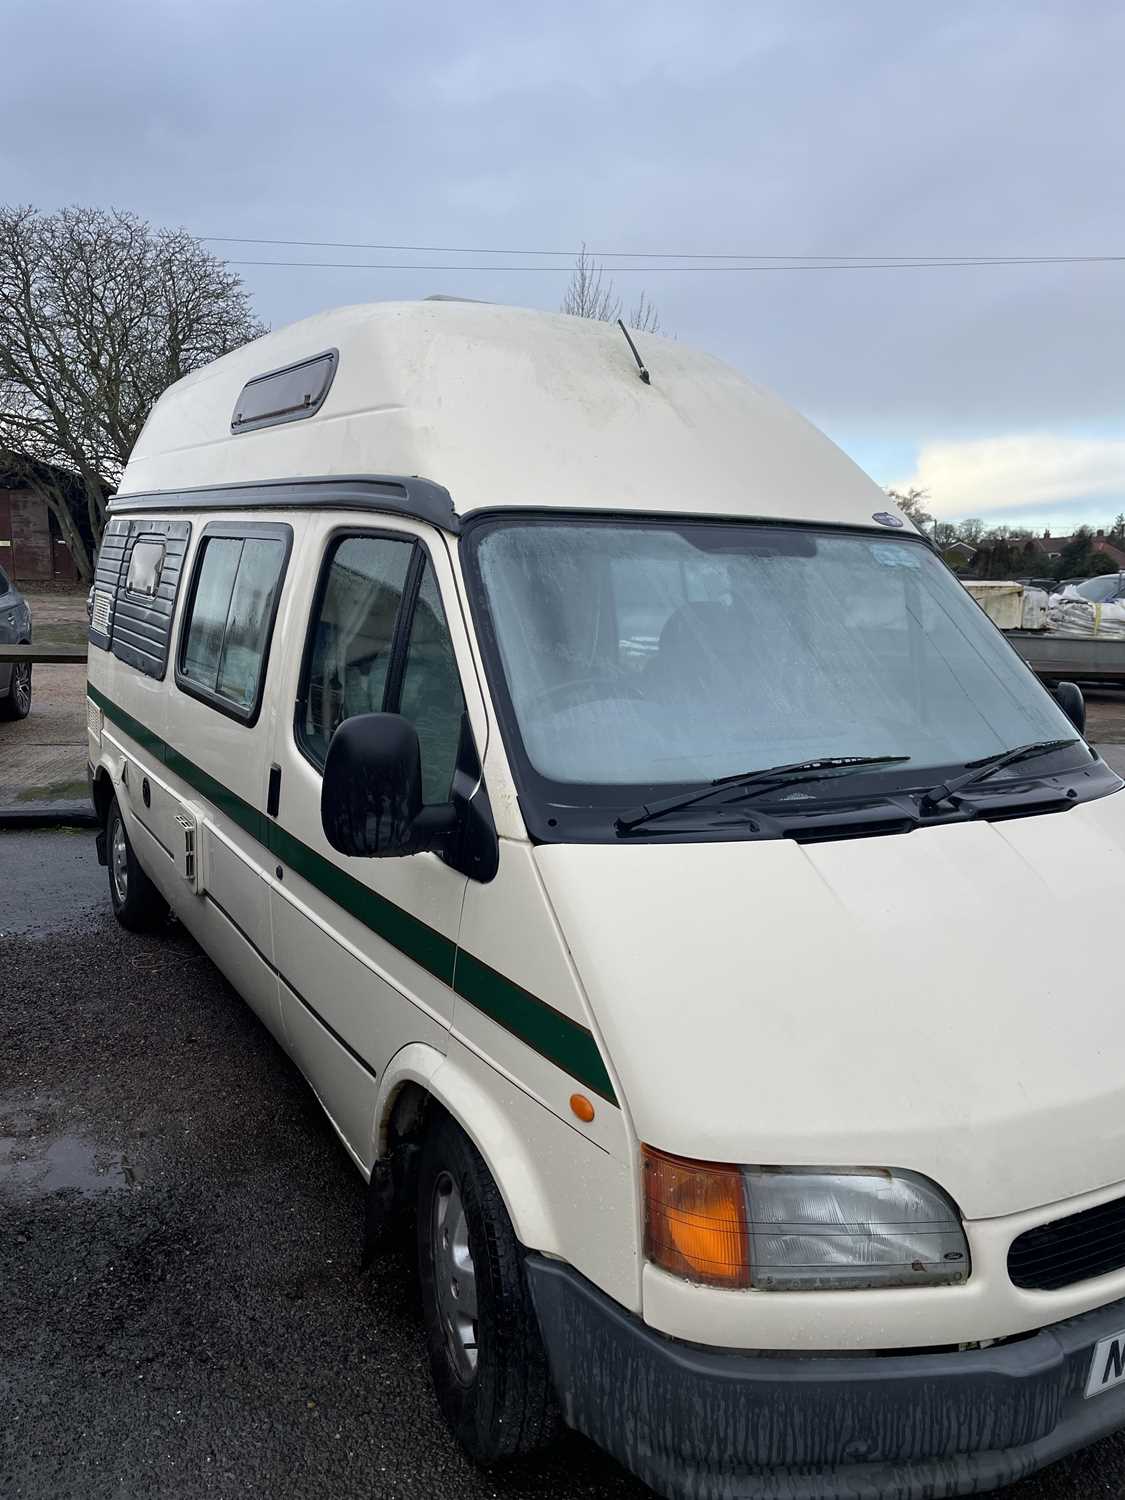 1996 Ford Transit Campervan Duetto Autosleeper - Image 17 of 17